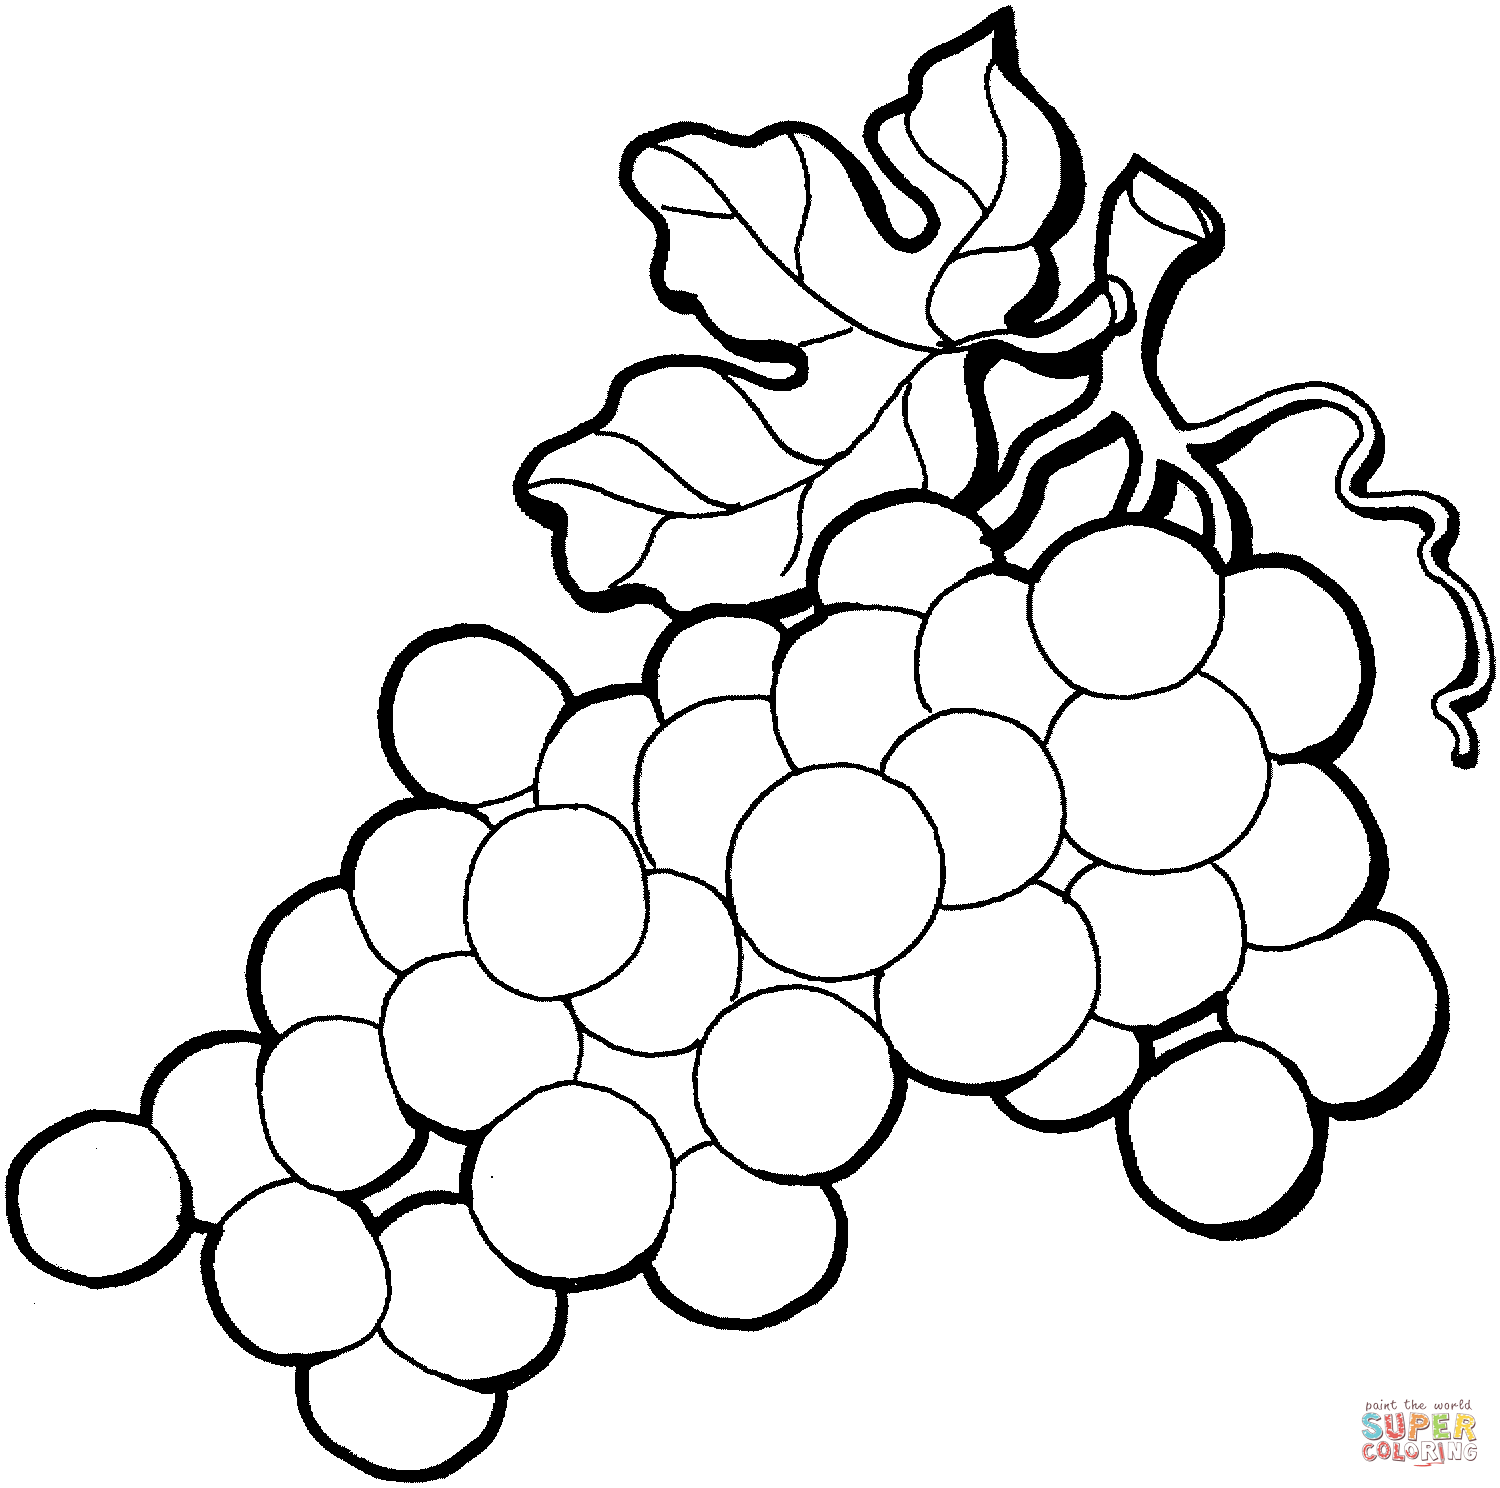 Grape 4 coloring page | Free Printable Coloring Pages